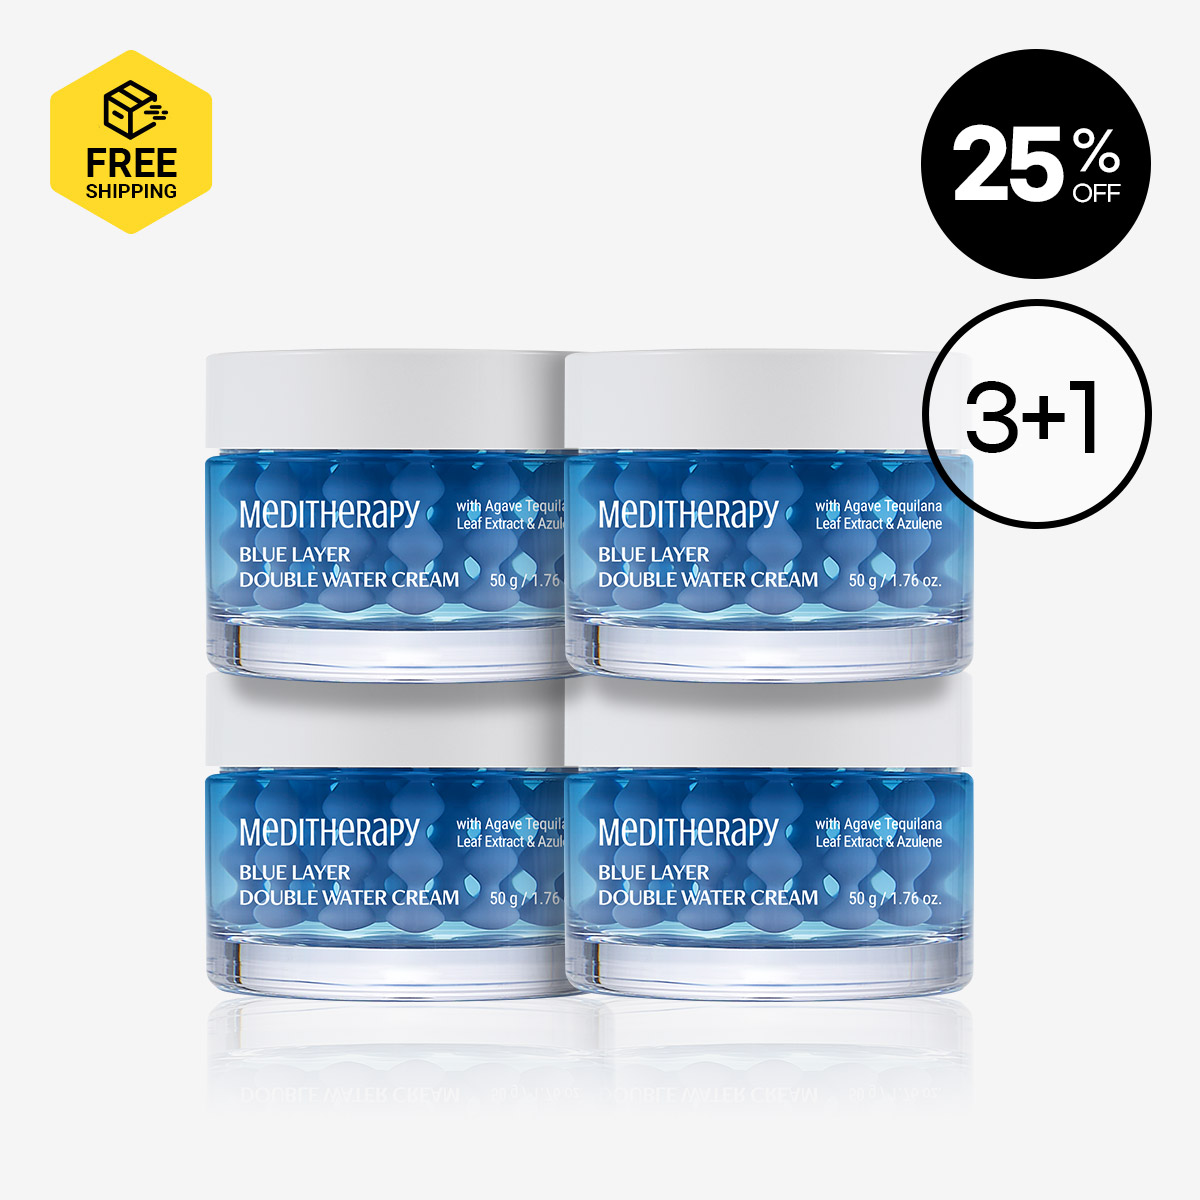 [MEDITHERAPY] Blue Layer Double Water Cream 3+1